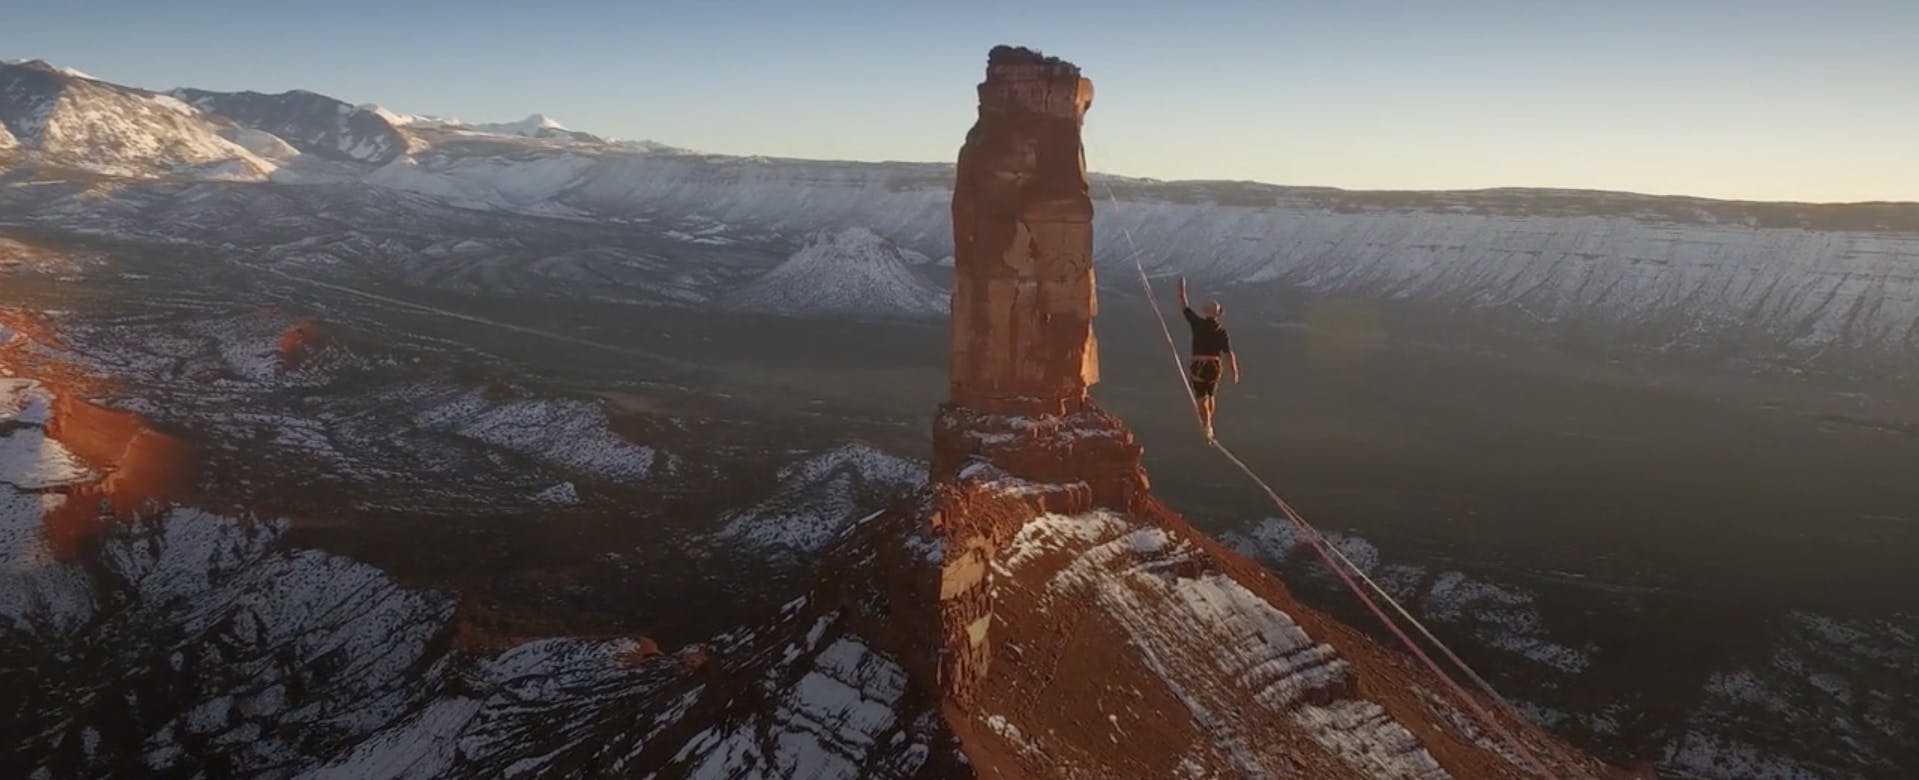 Across the Sky: Jaw-Dropping Slackline World Record